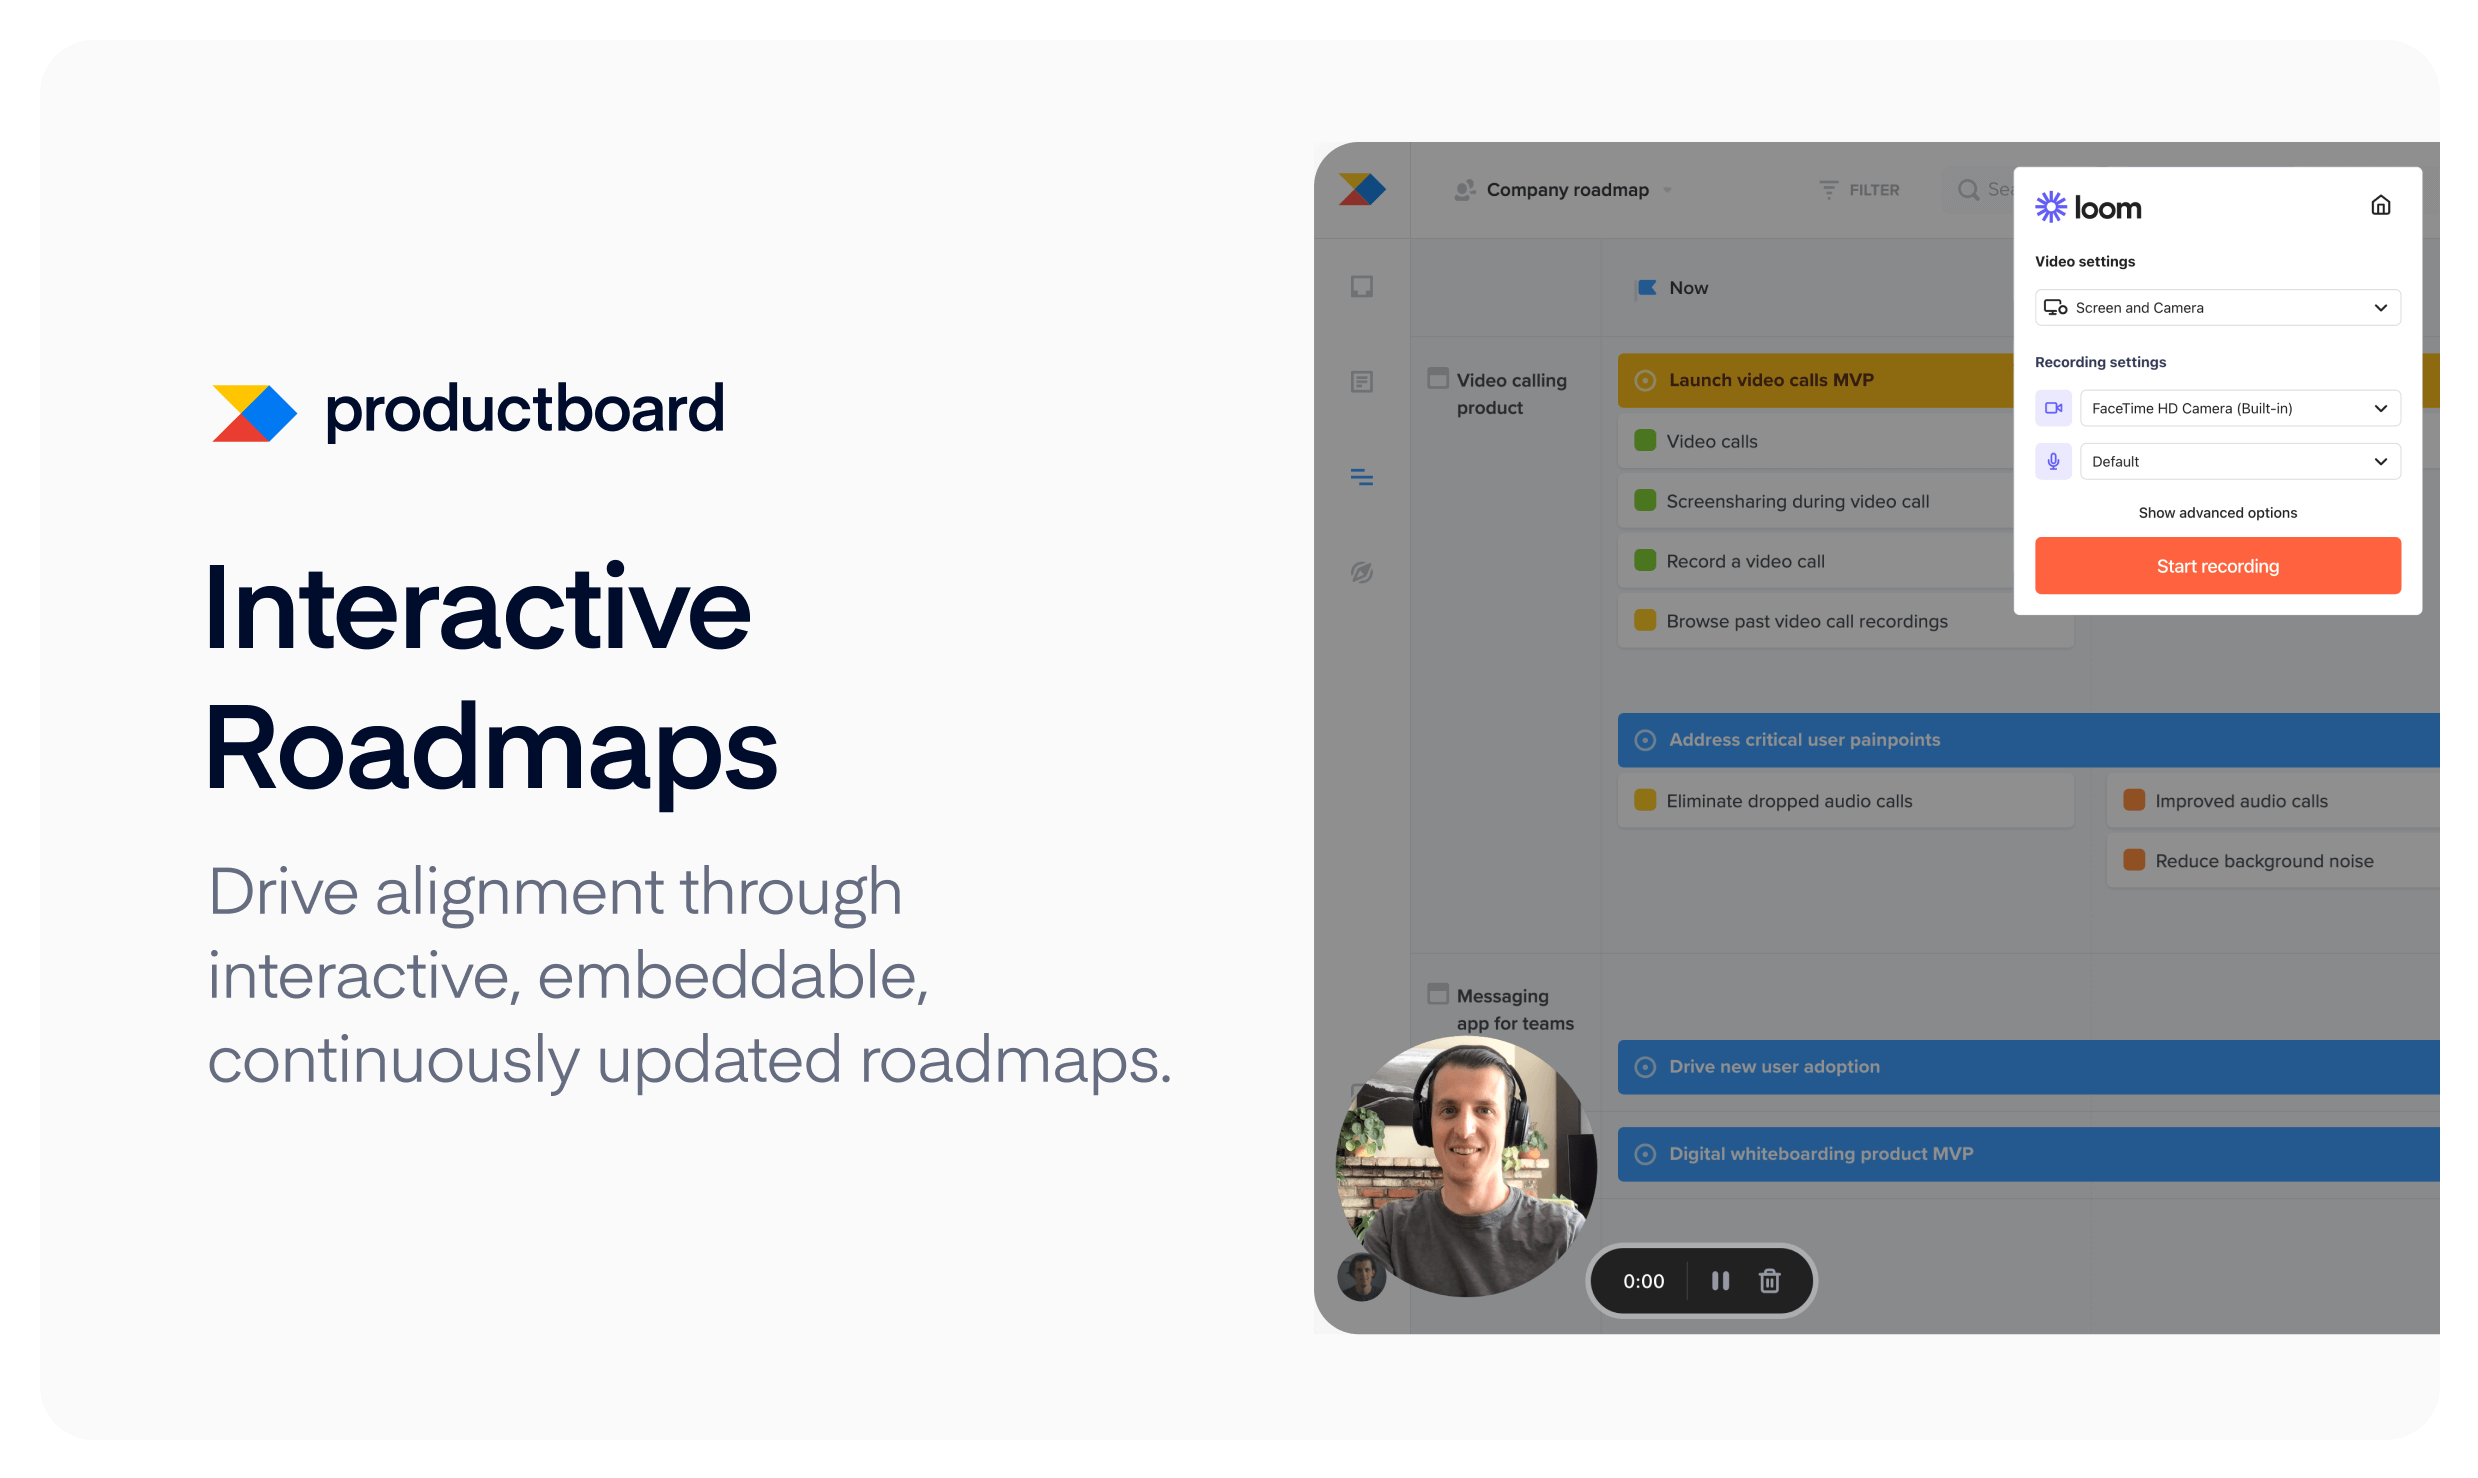 Drive alignment through interactive, embeddable, continuously updated roadmaps